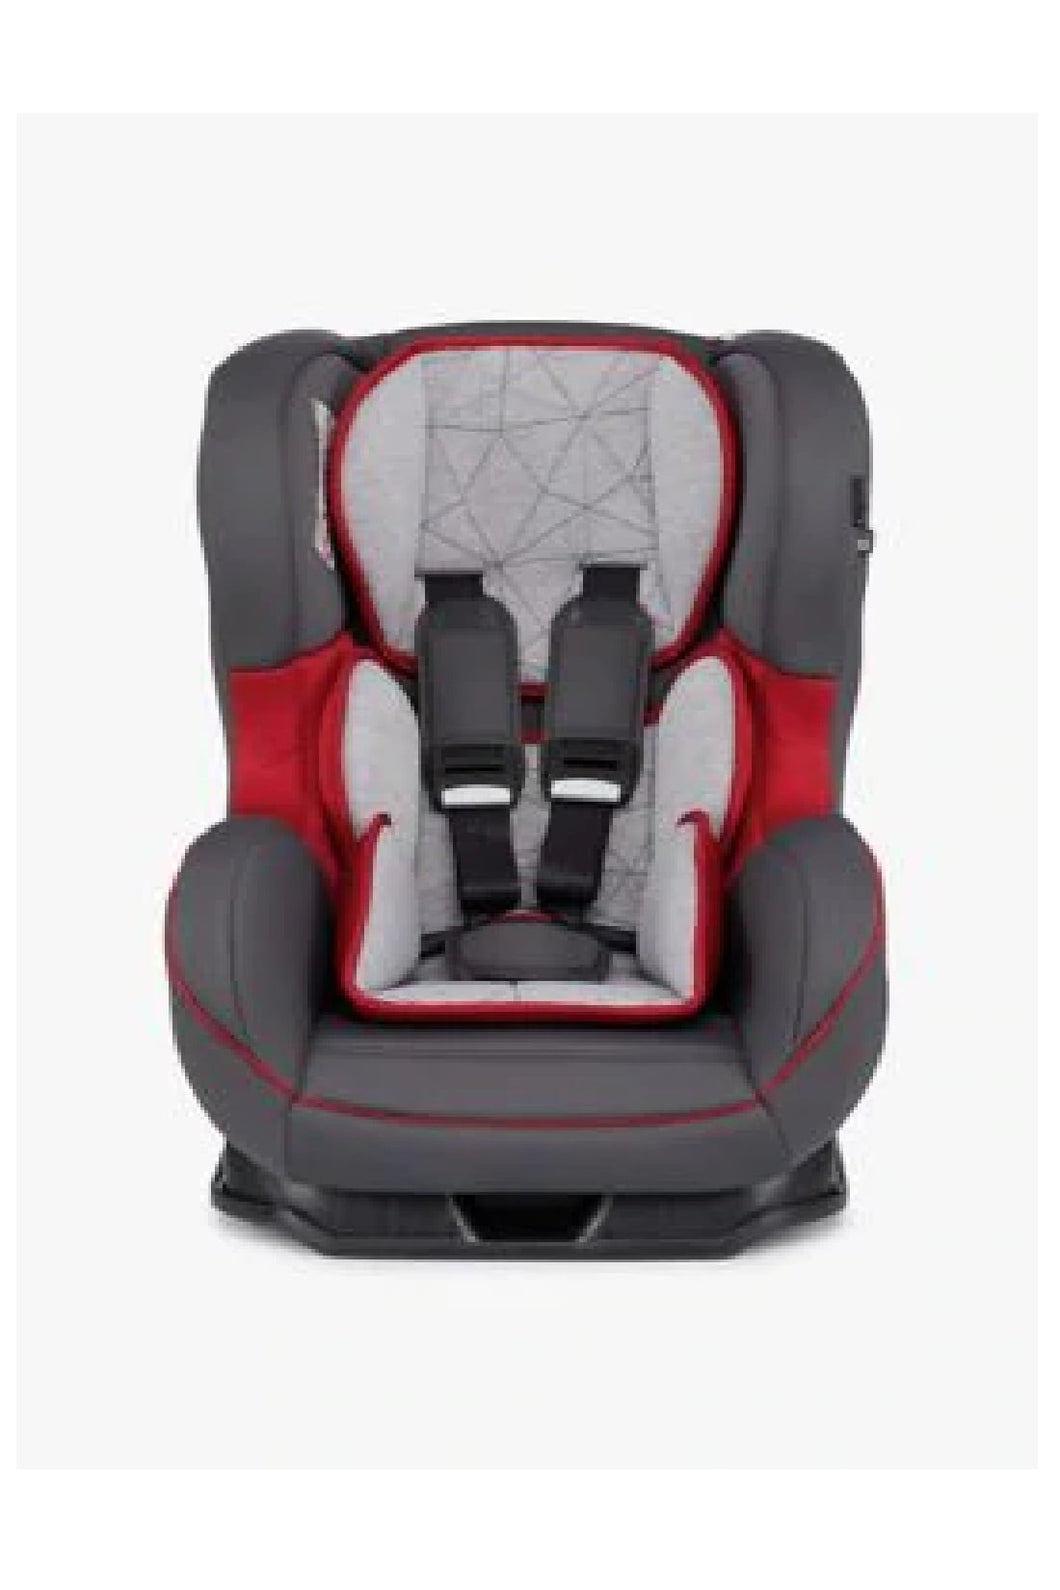 Mothercare Madrid Combination Car Seat Blackred 1